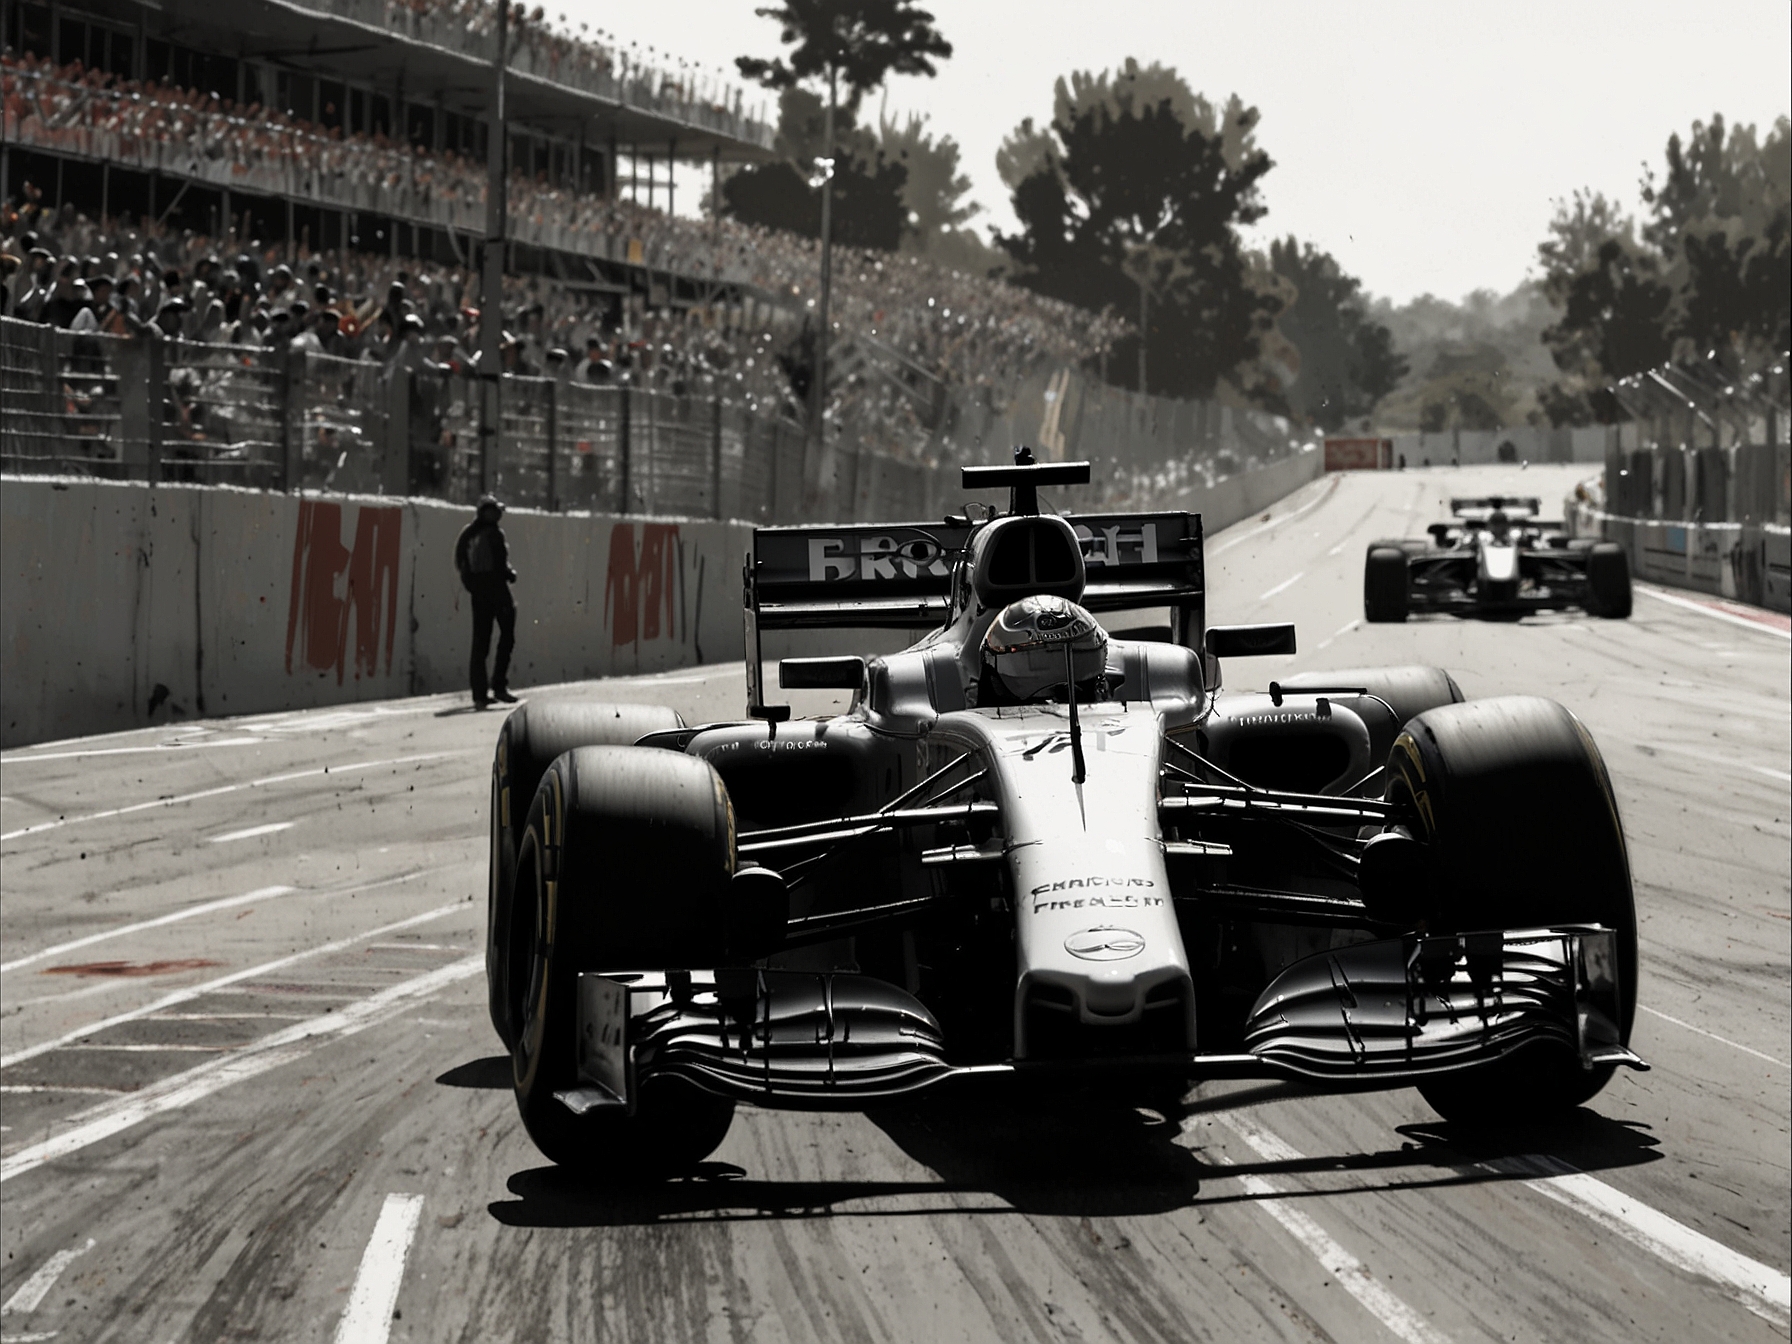 An F1 driver navigating a challenging corner at the Circuit de Barcelona-Catalunya, with the backdrop of fans and high-tech pit crew, symbolizing the physical and mental demands of the sport.